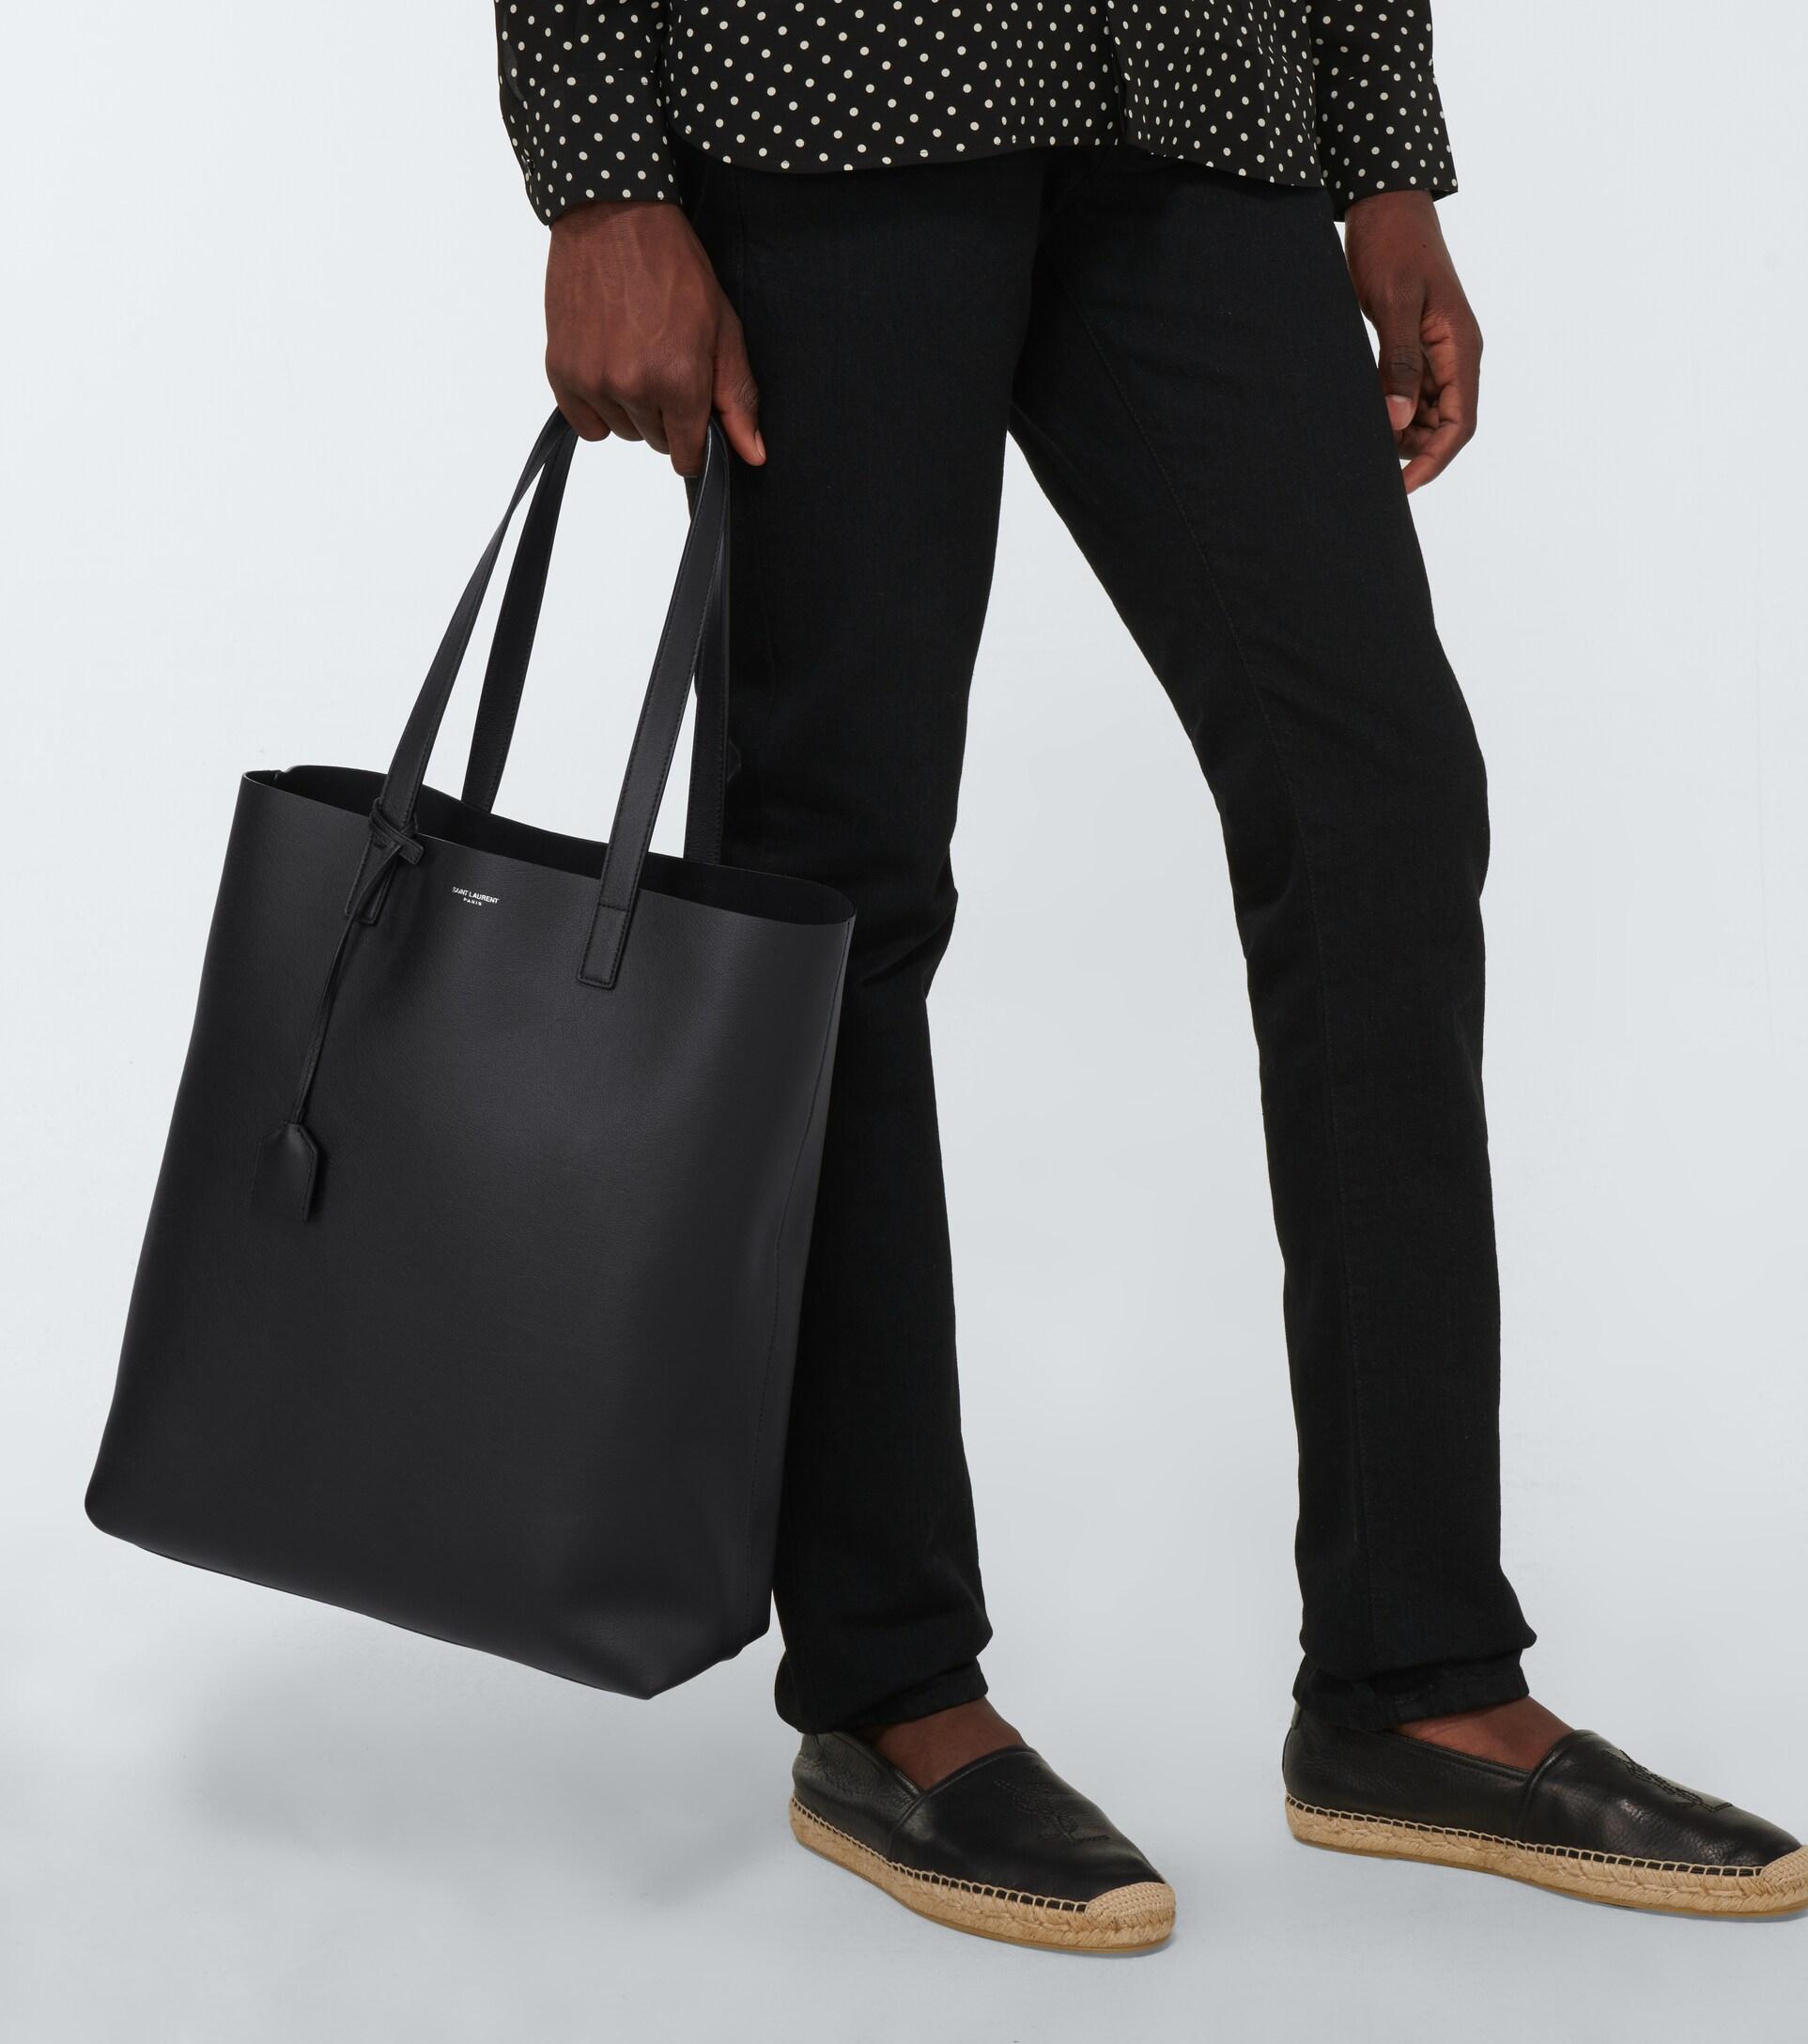 Mens Bags Tote bags Saint Laurent Bold East/west Leather Tote Bag in Black for Men 